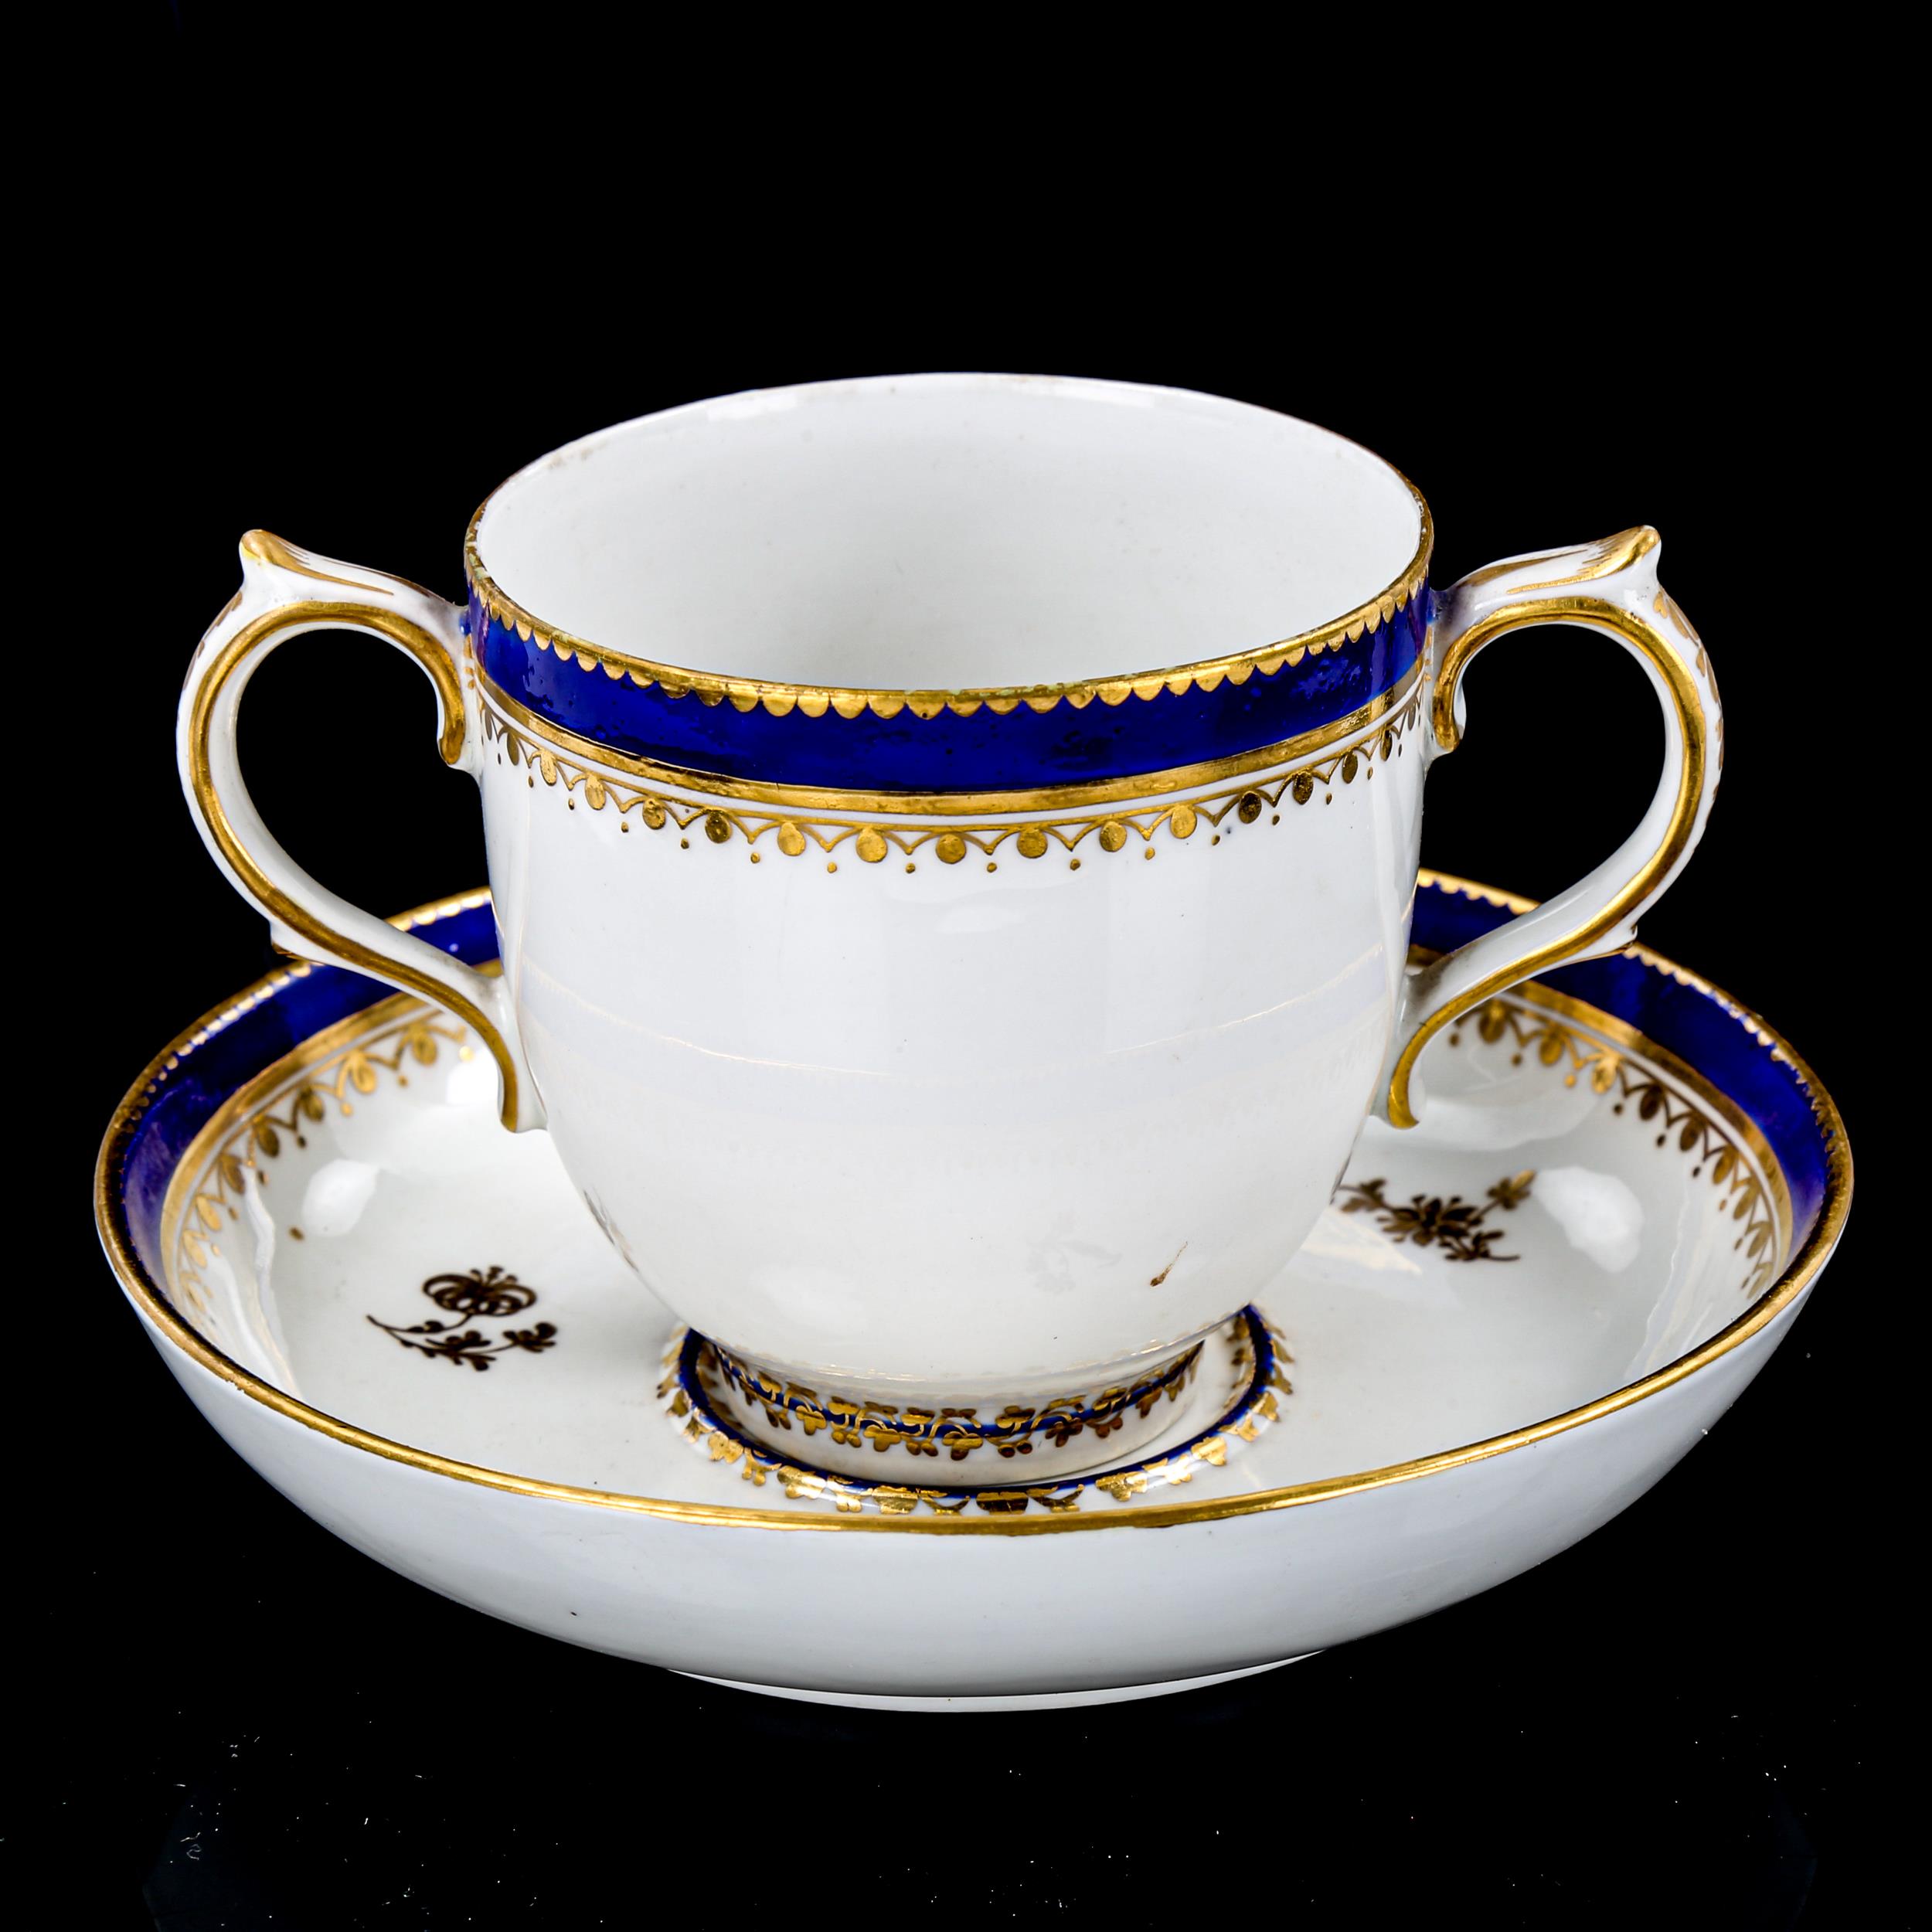 Crown Derby 2-handled cup and saucer, with blue and gilt decoration